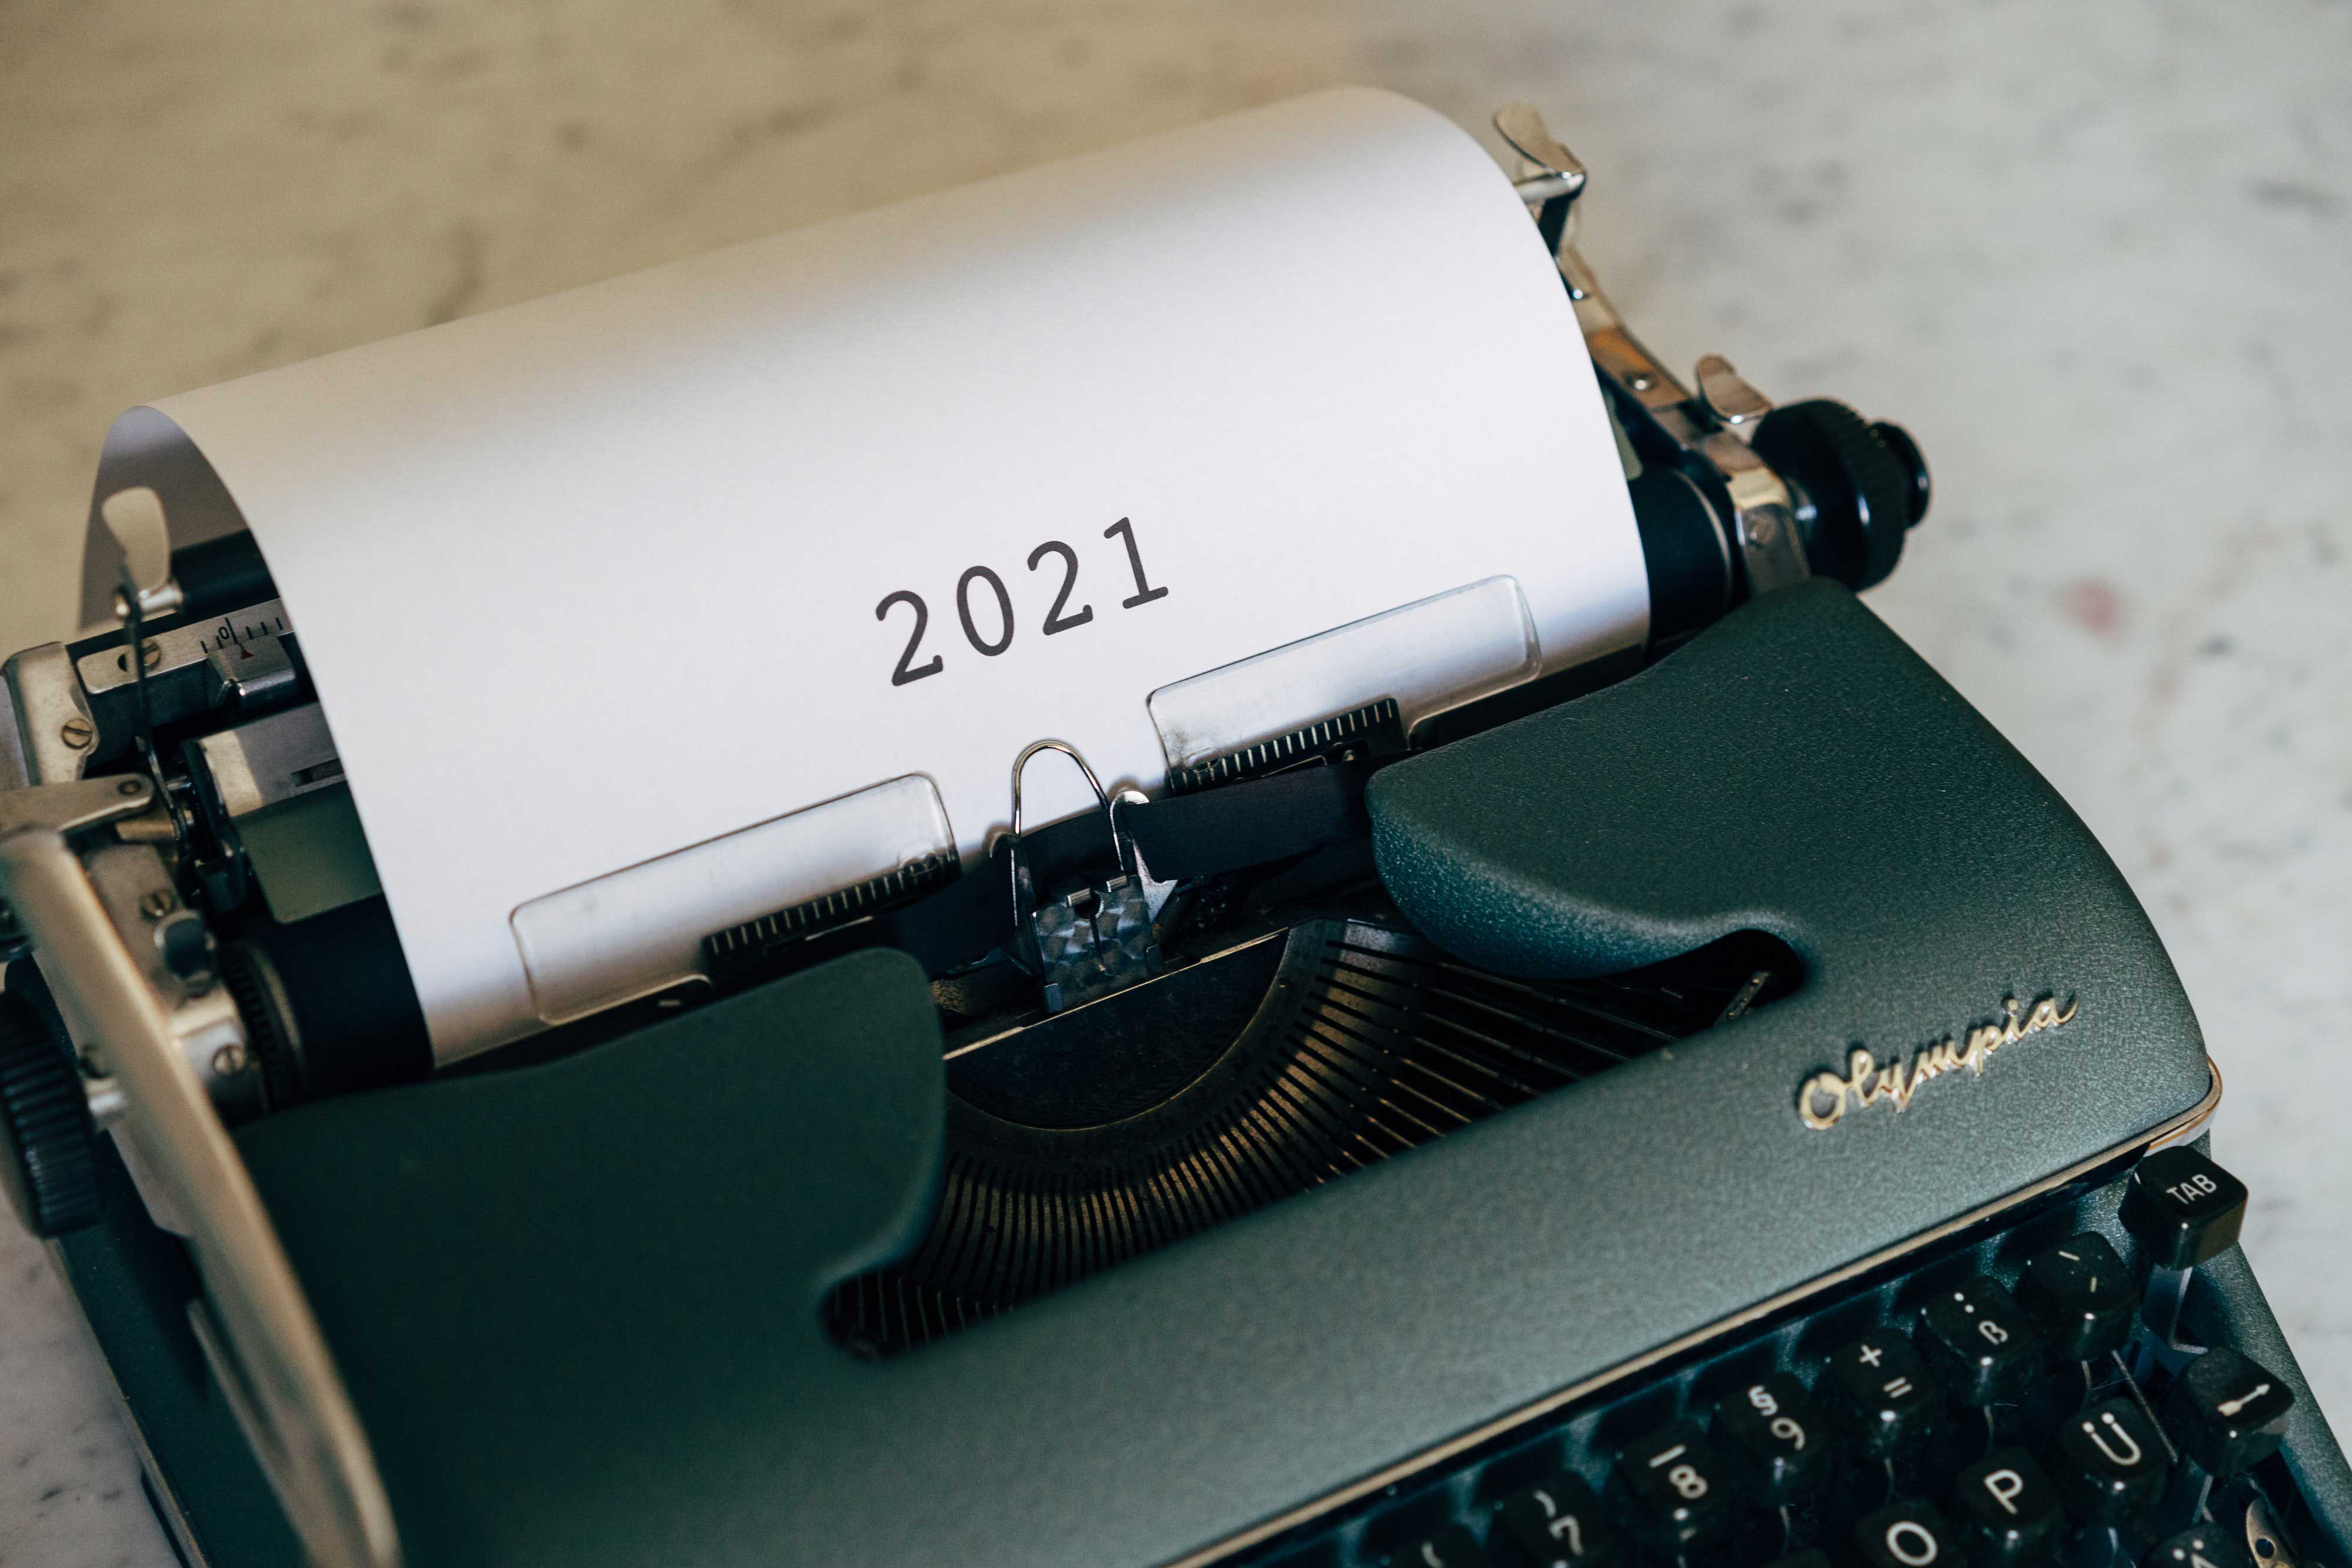 A type writer with 2021 written on paper